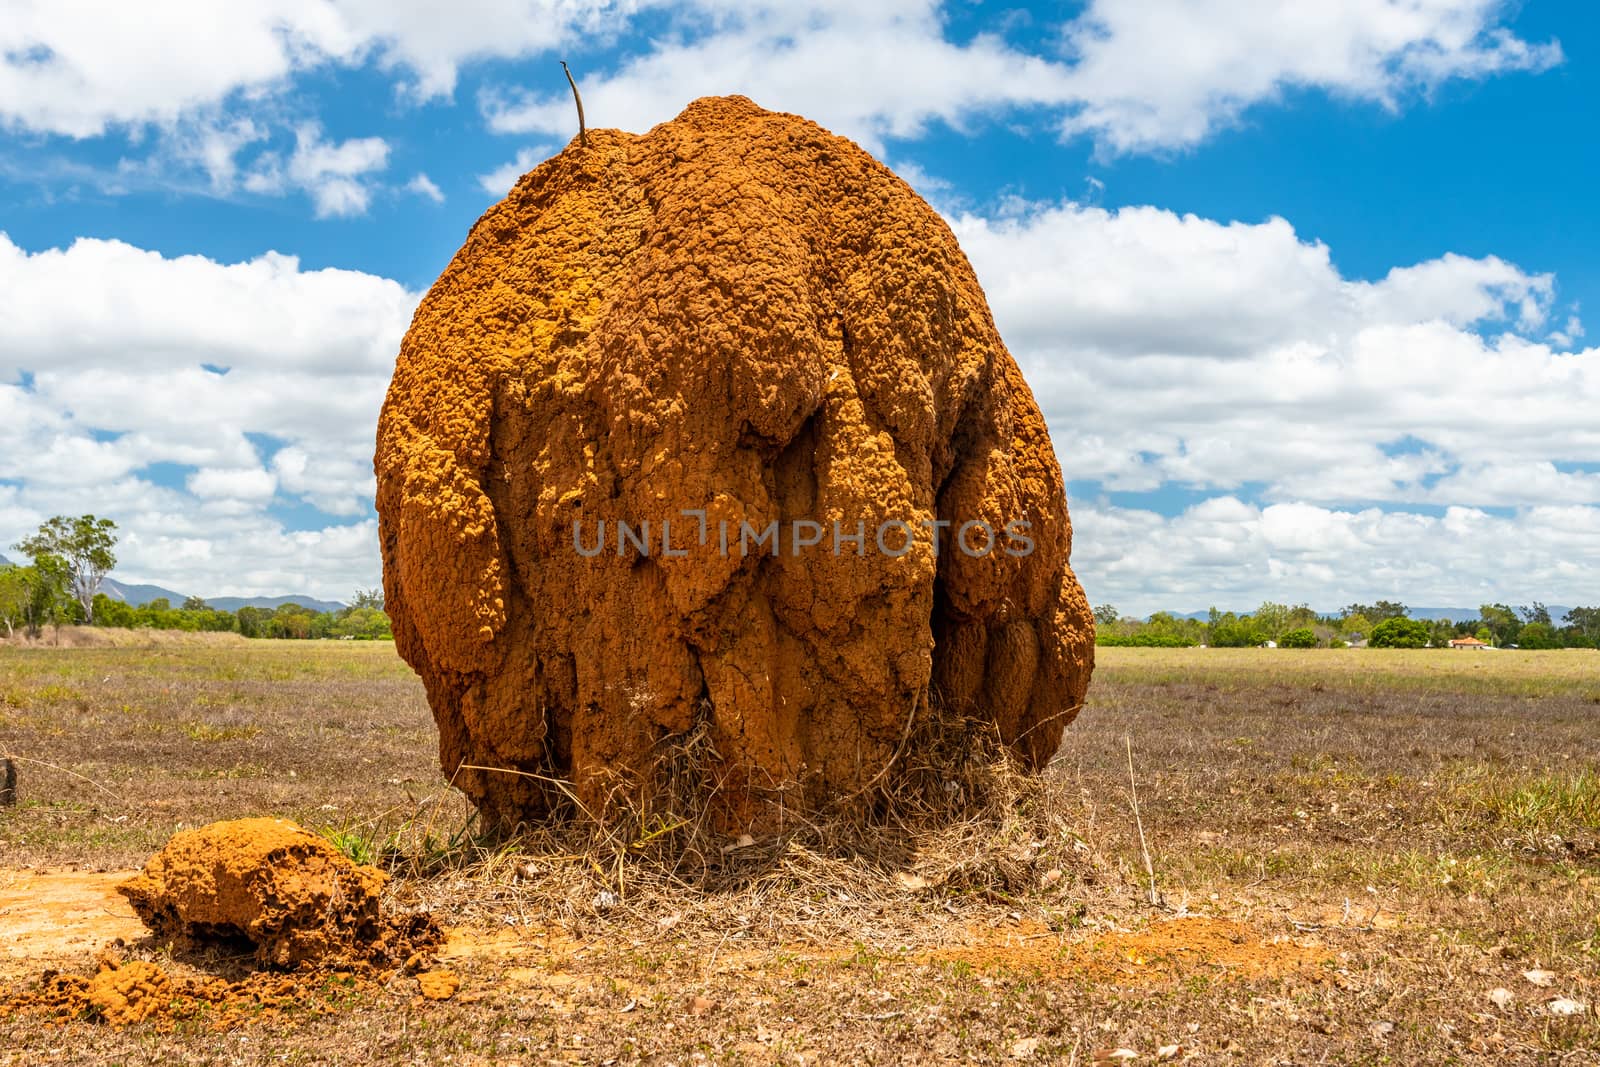 Isolated large termite mould in Queensland outback, Australia by mauricallari